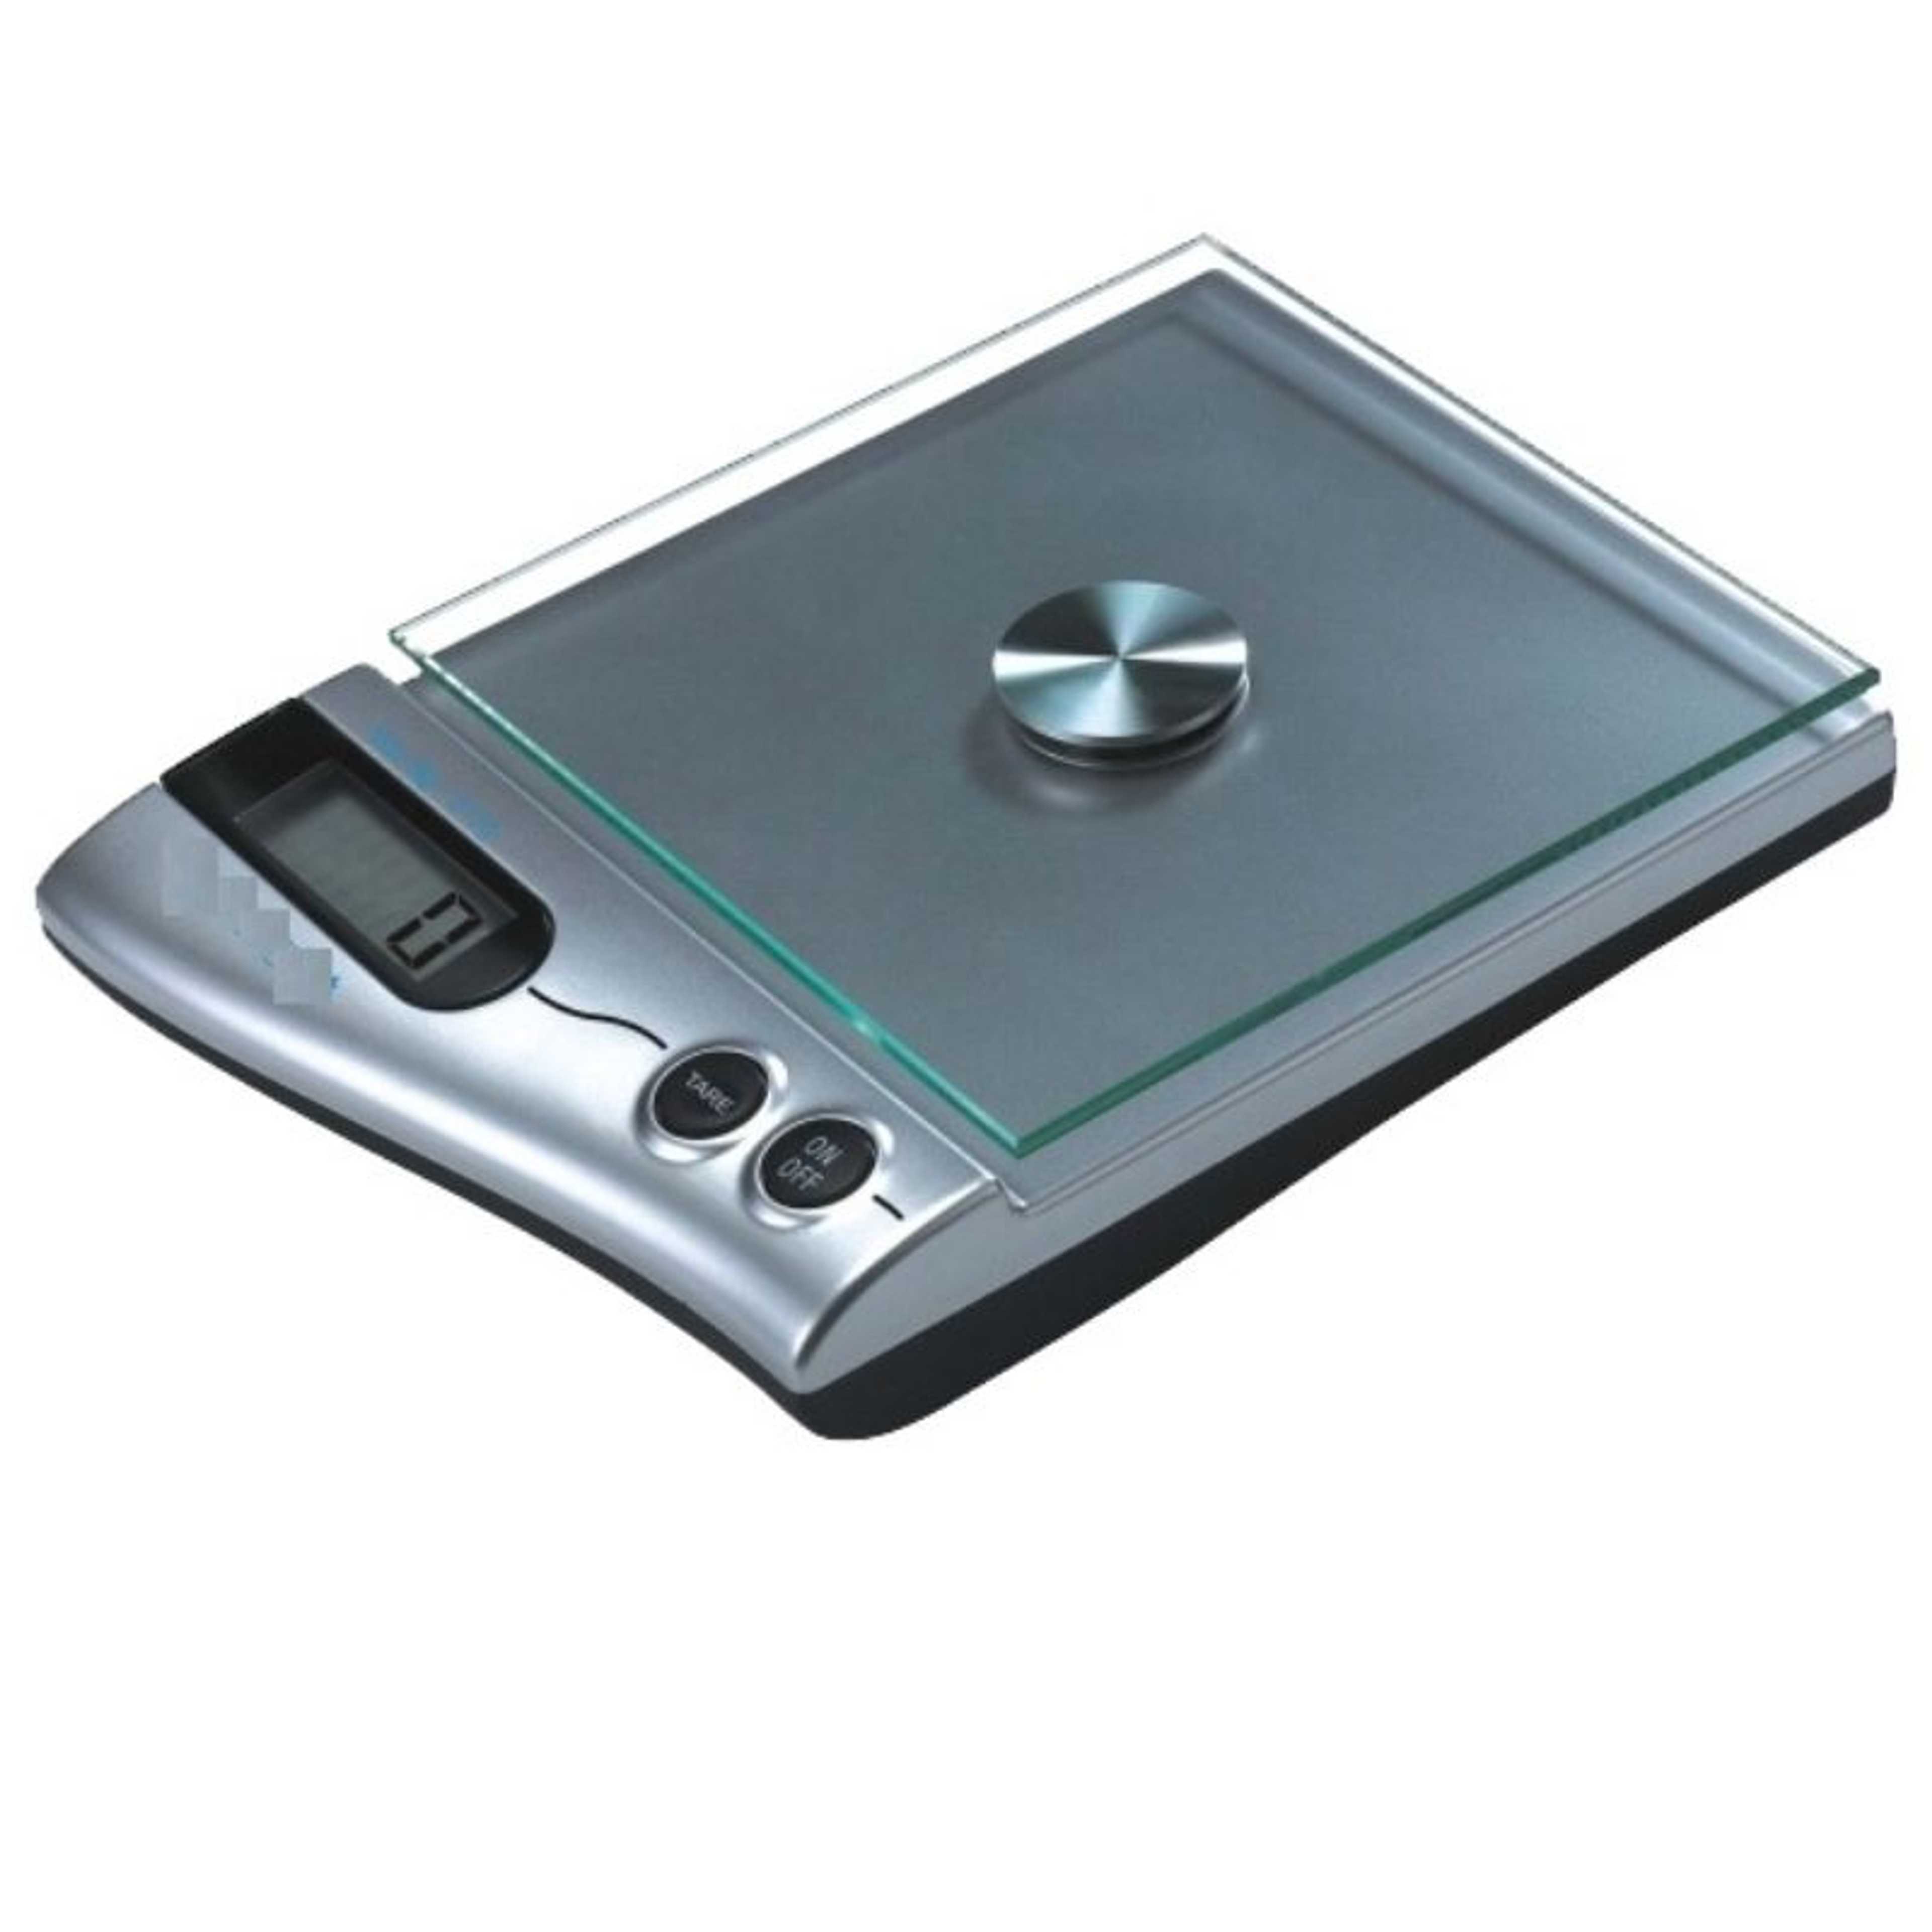 LCD Digital Display Professional Electronic Kitchen/Jewelry Weighting Scale With Glass Platform